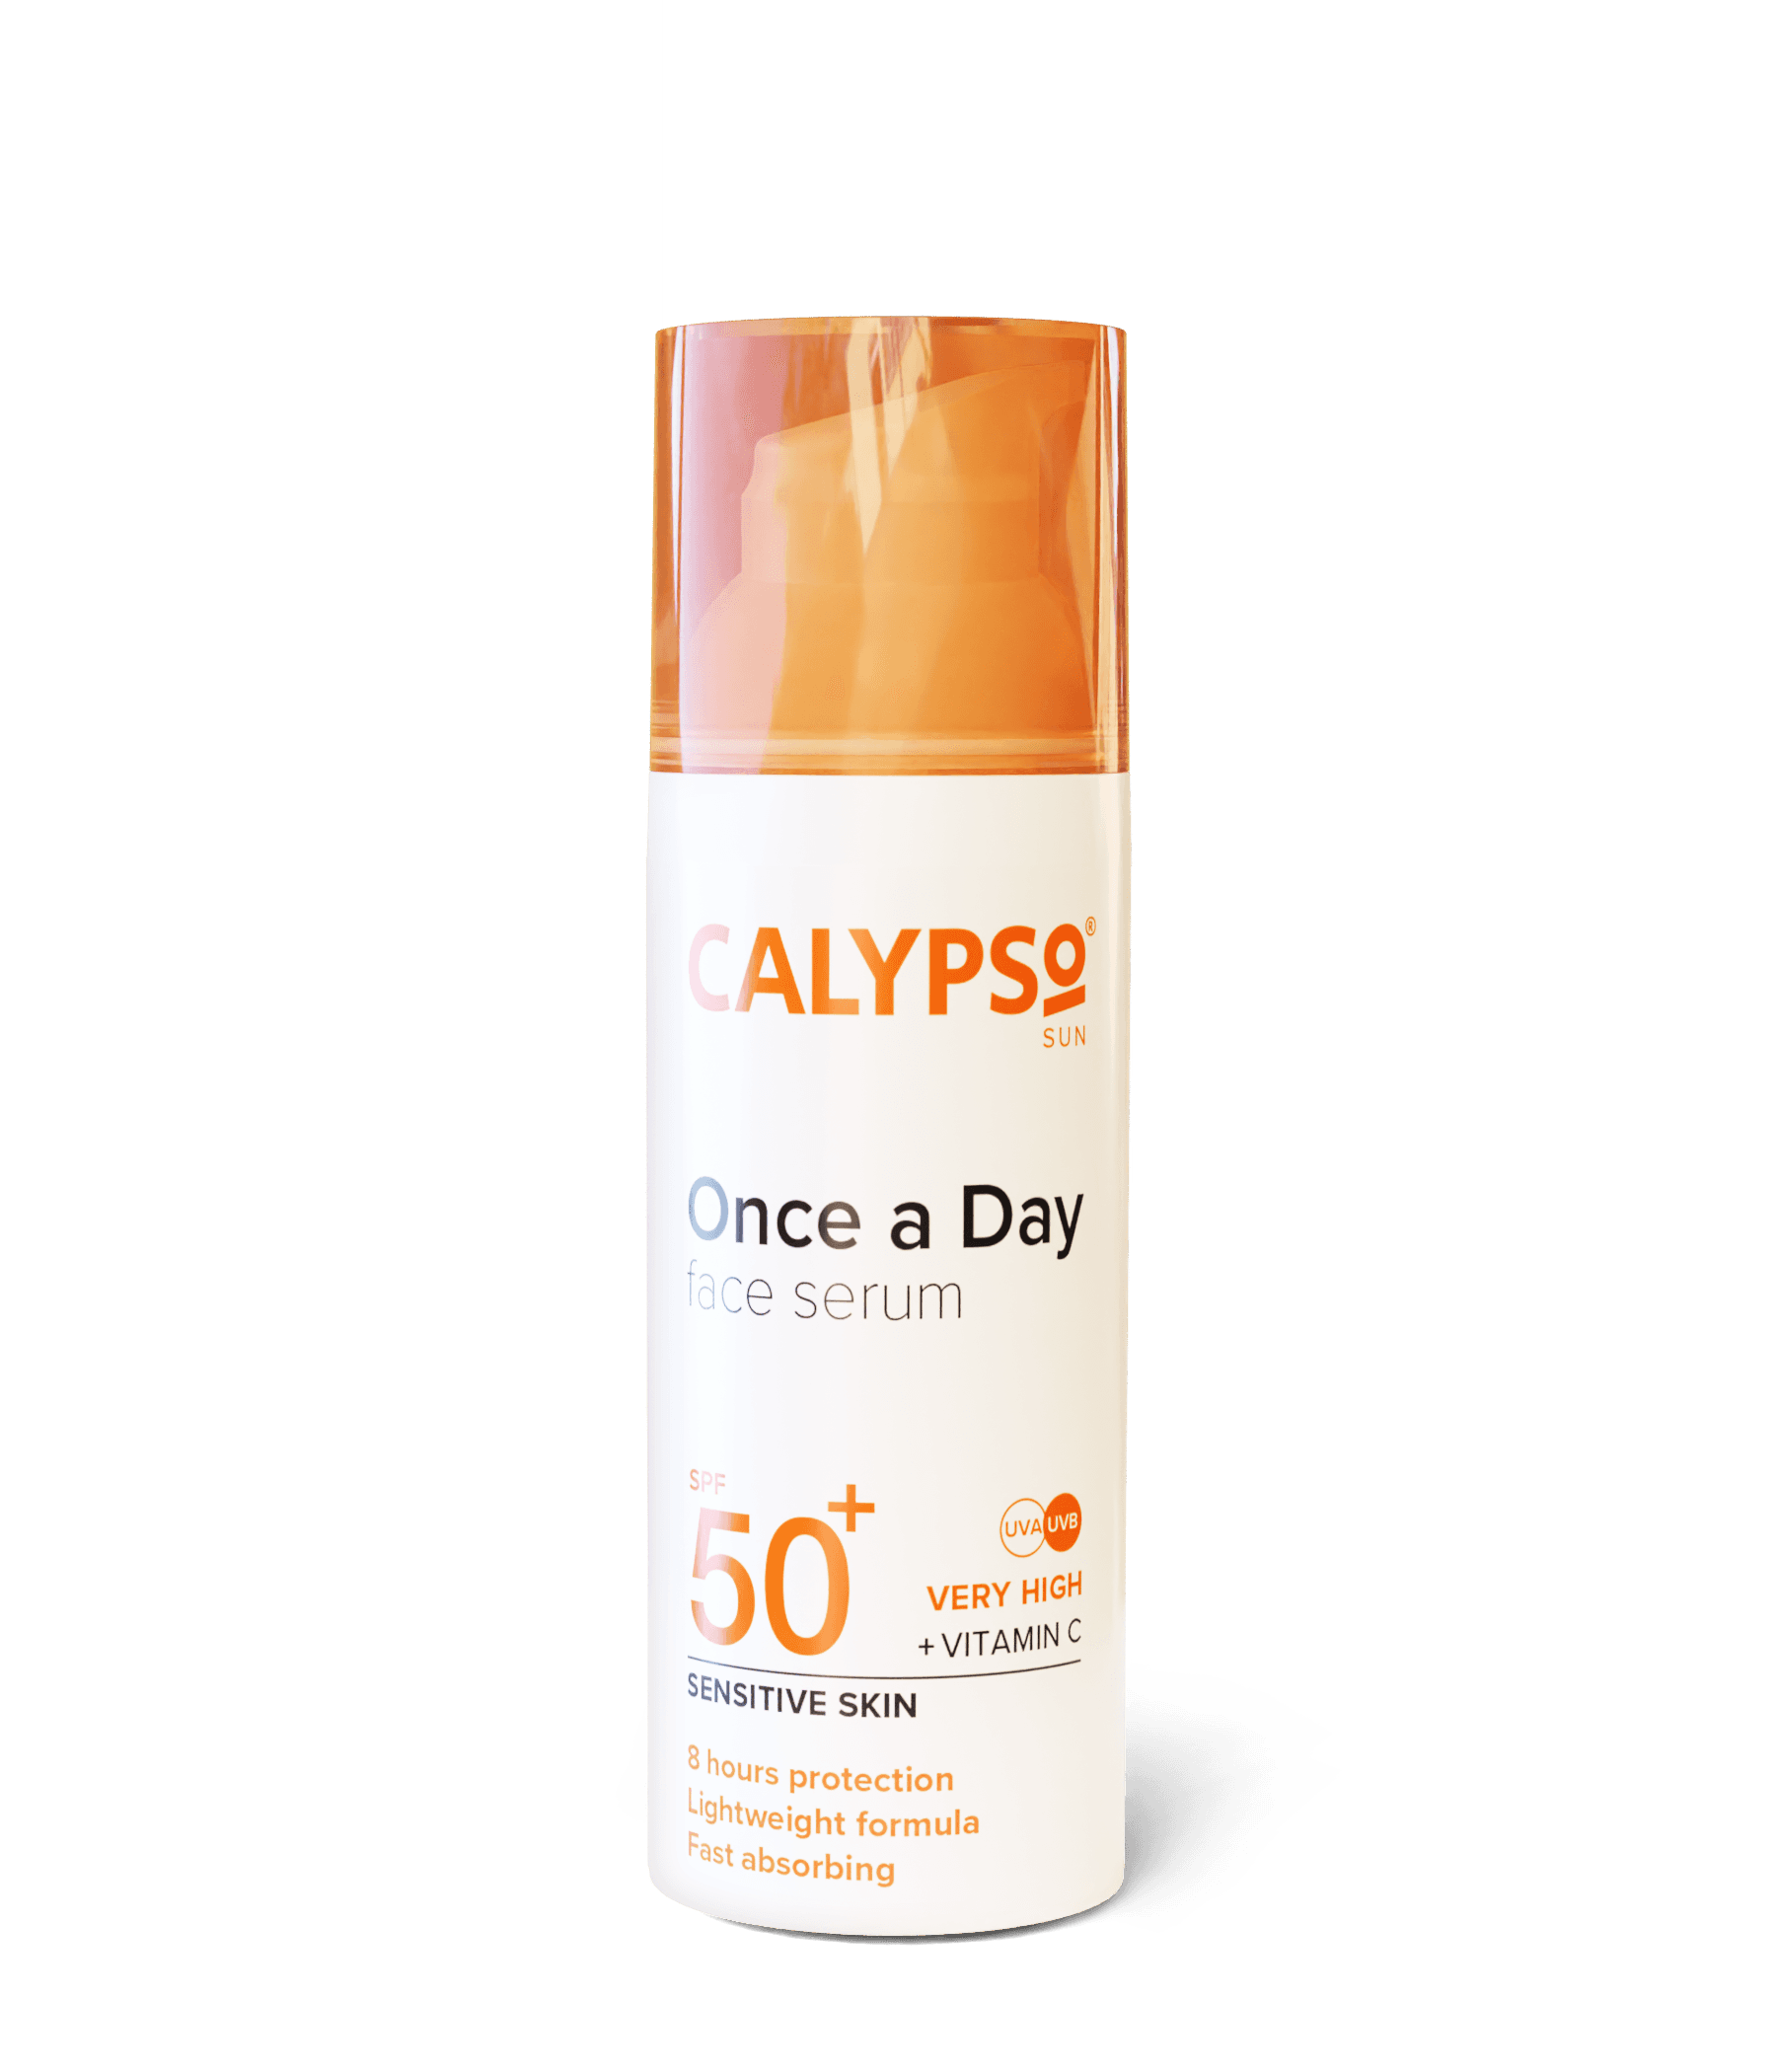 Calypso Once a Day Serum SPF50+ with vitamin c, bottle front